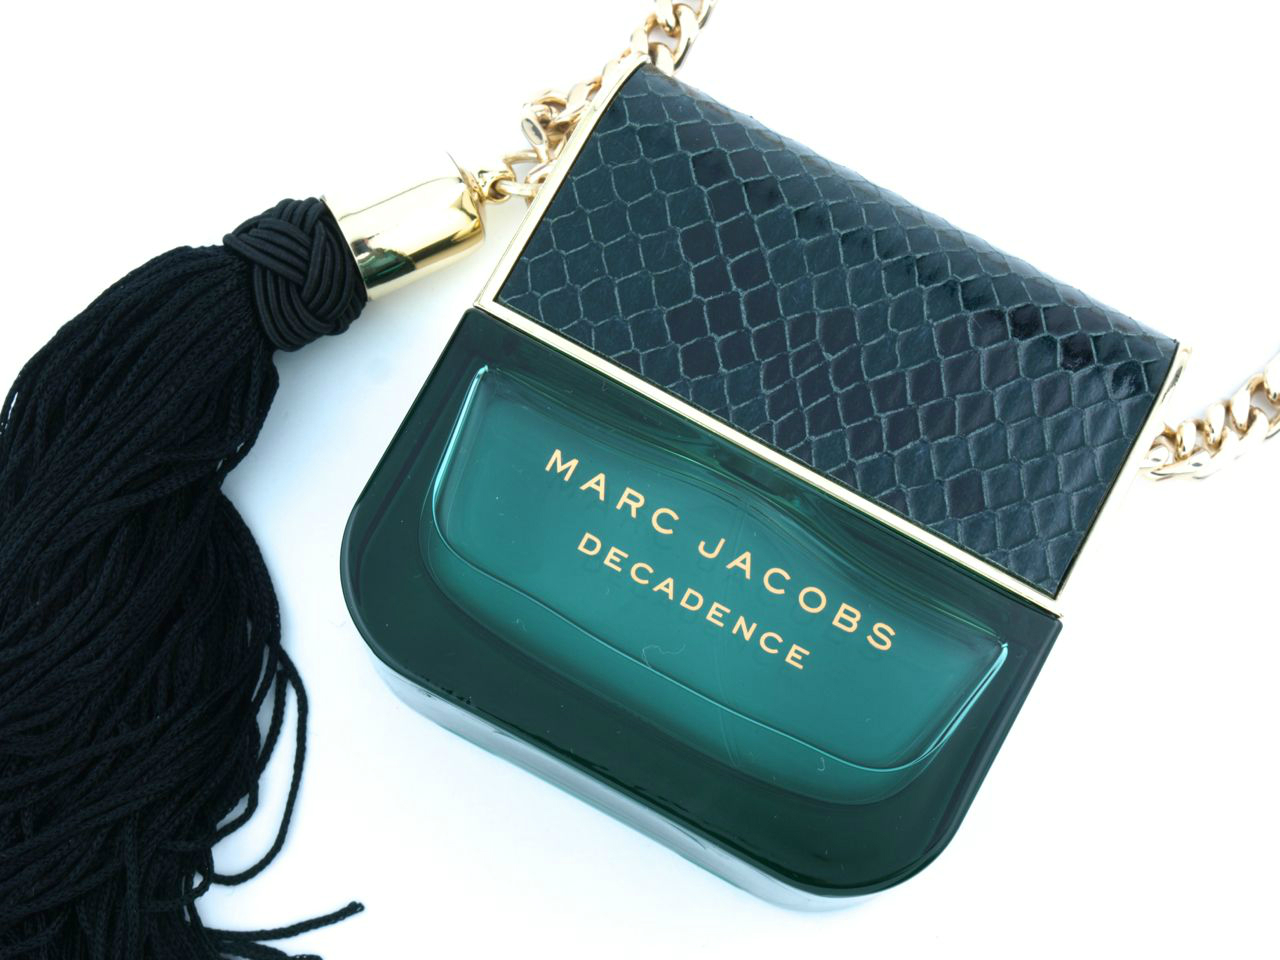 Decadence Marc Jacobs perfume - a fragrance for women 2015